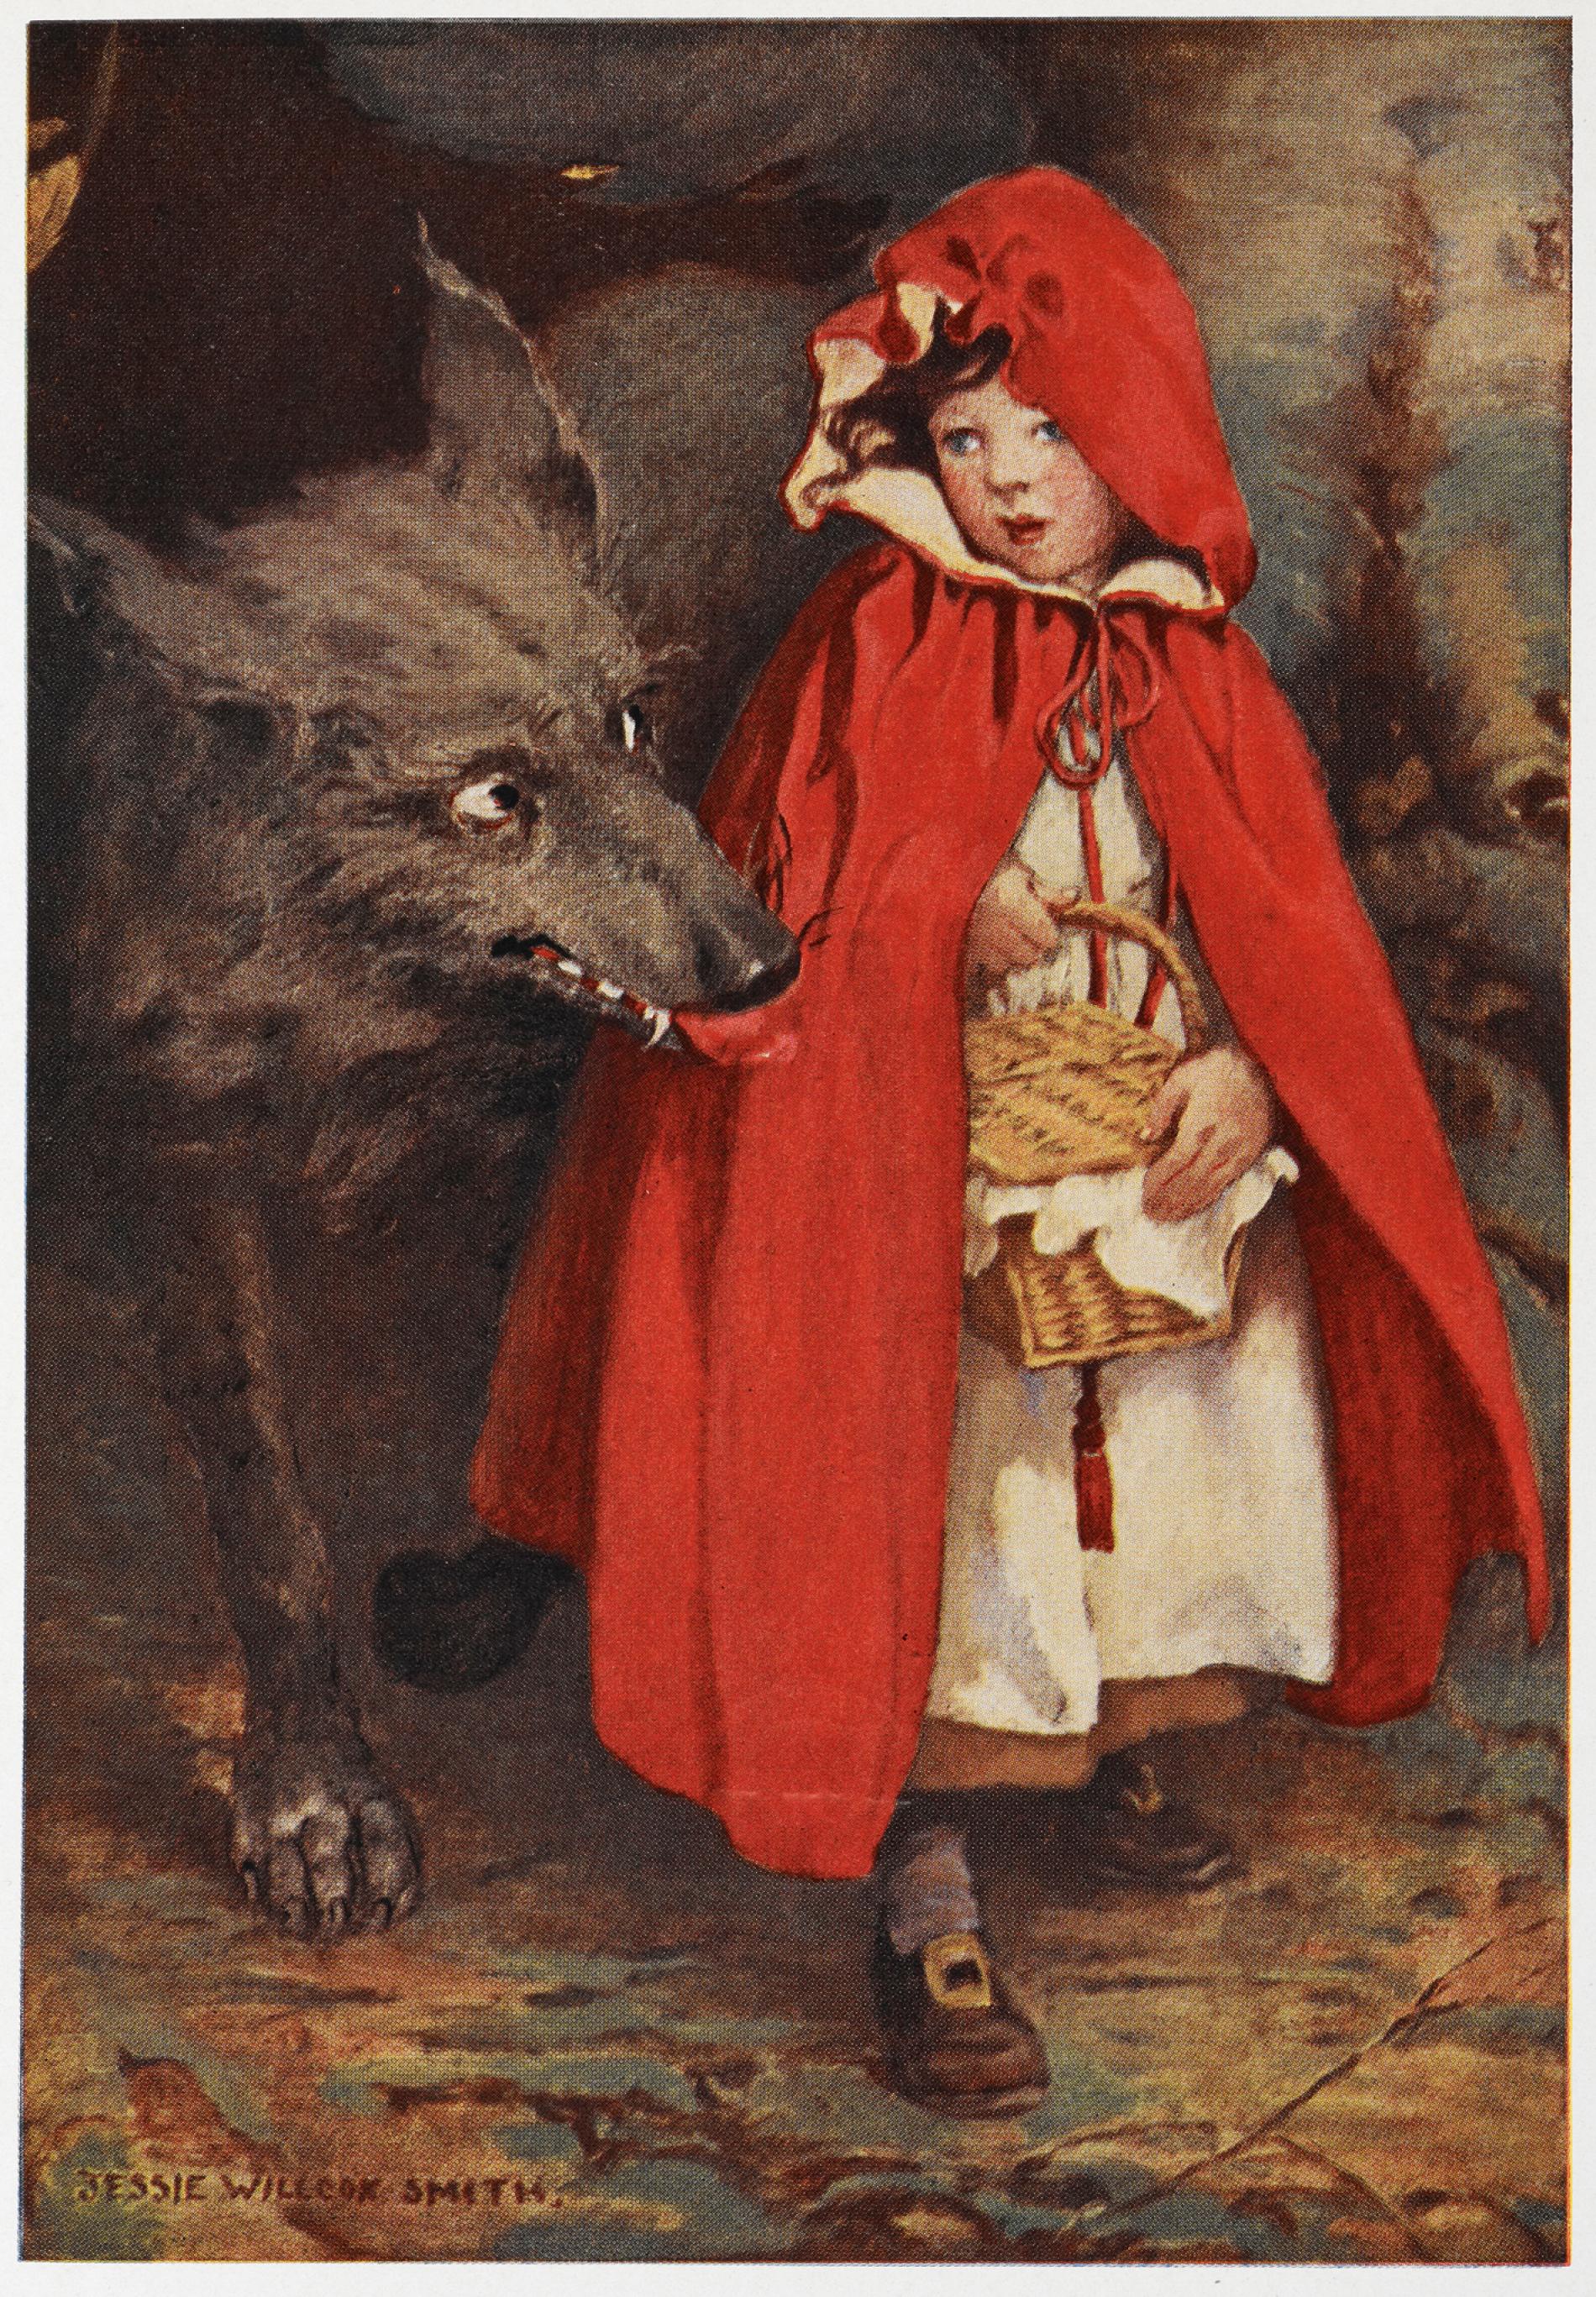 christina jeon recommends little red riding hood erotica pic